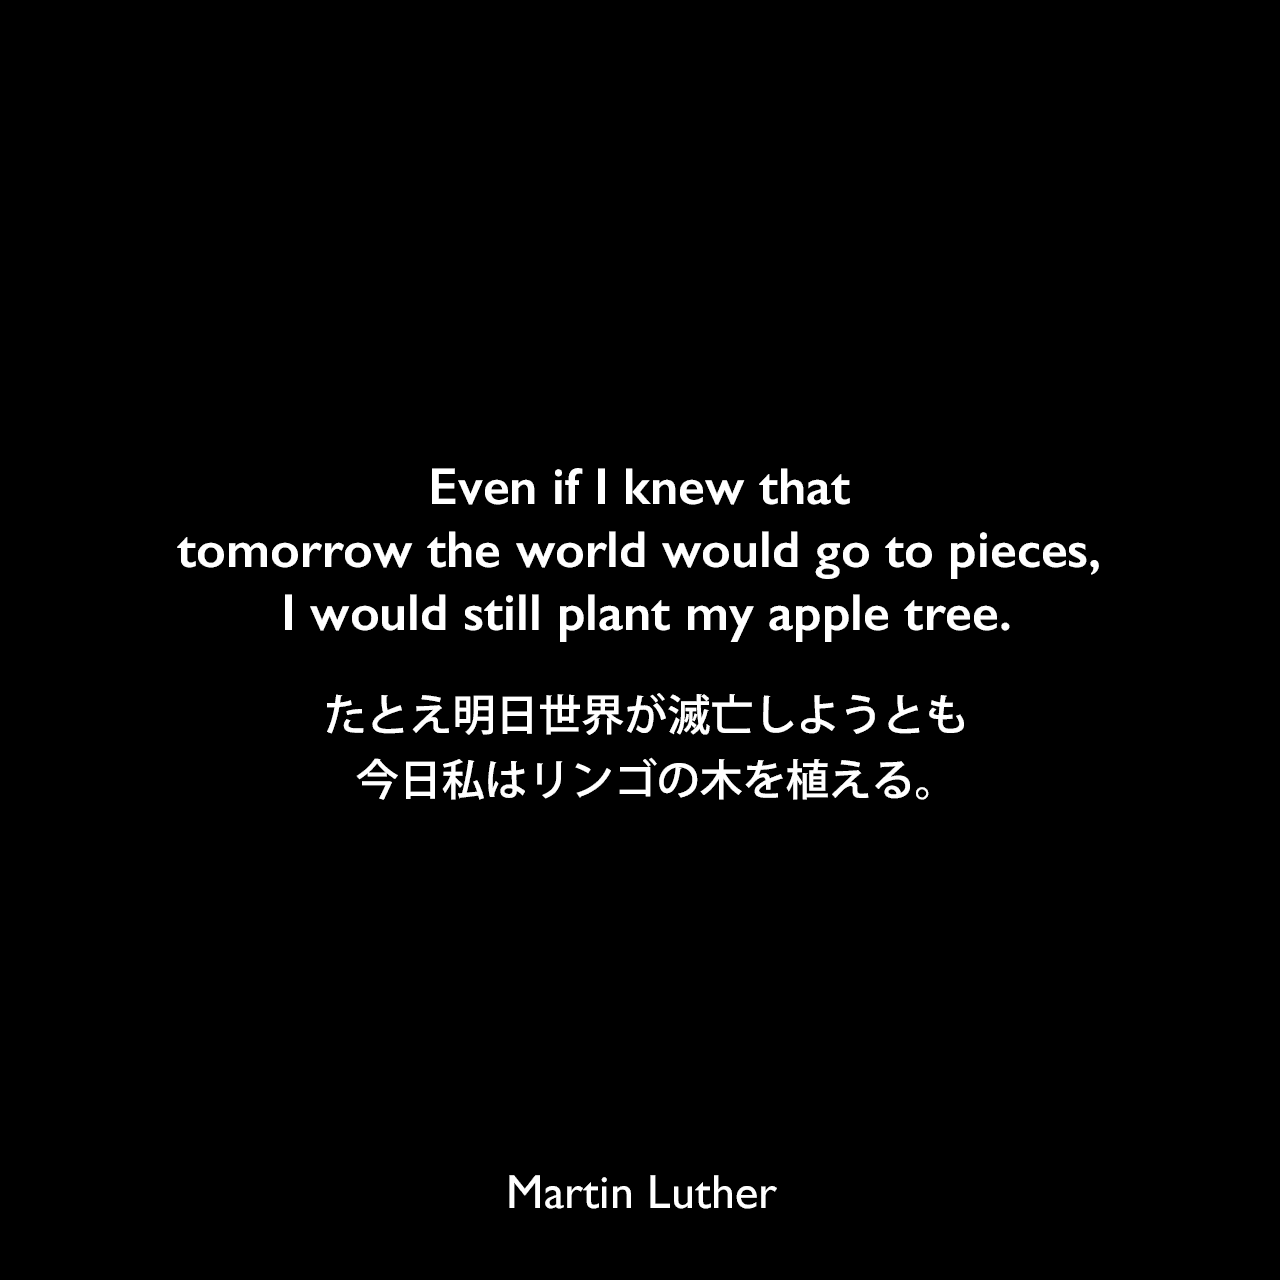 Even if I knew that tomorrow the world would go to pieces, I would still plant my apple tree.たとえ明日世界が滅亡しようとも、今日私はリンゴの木を植える。